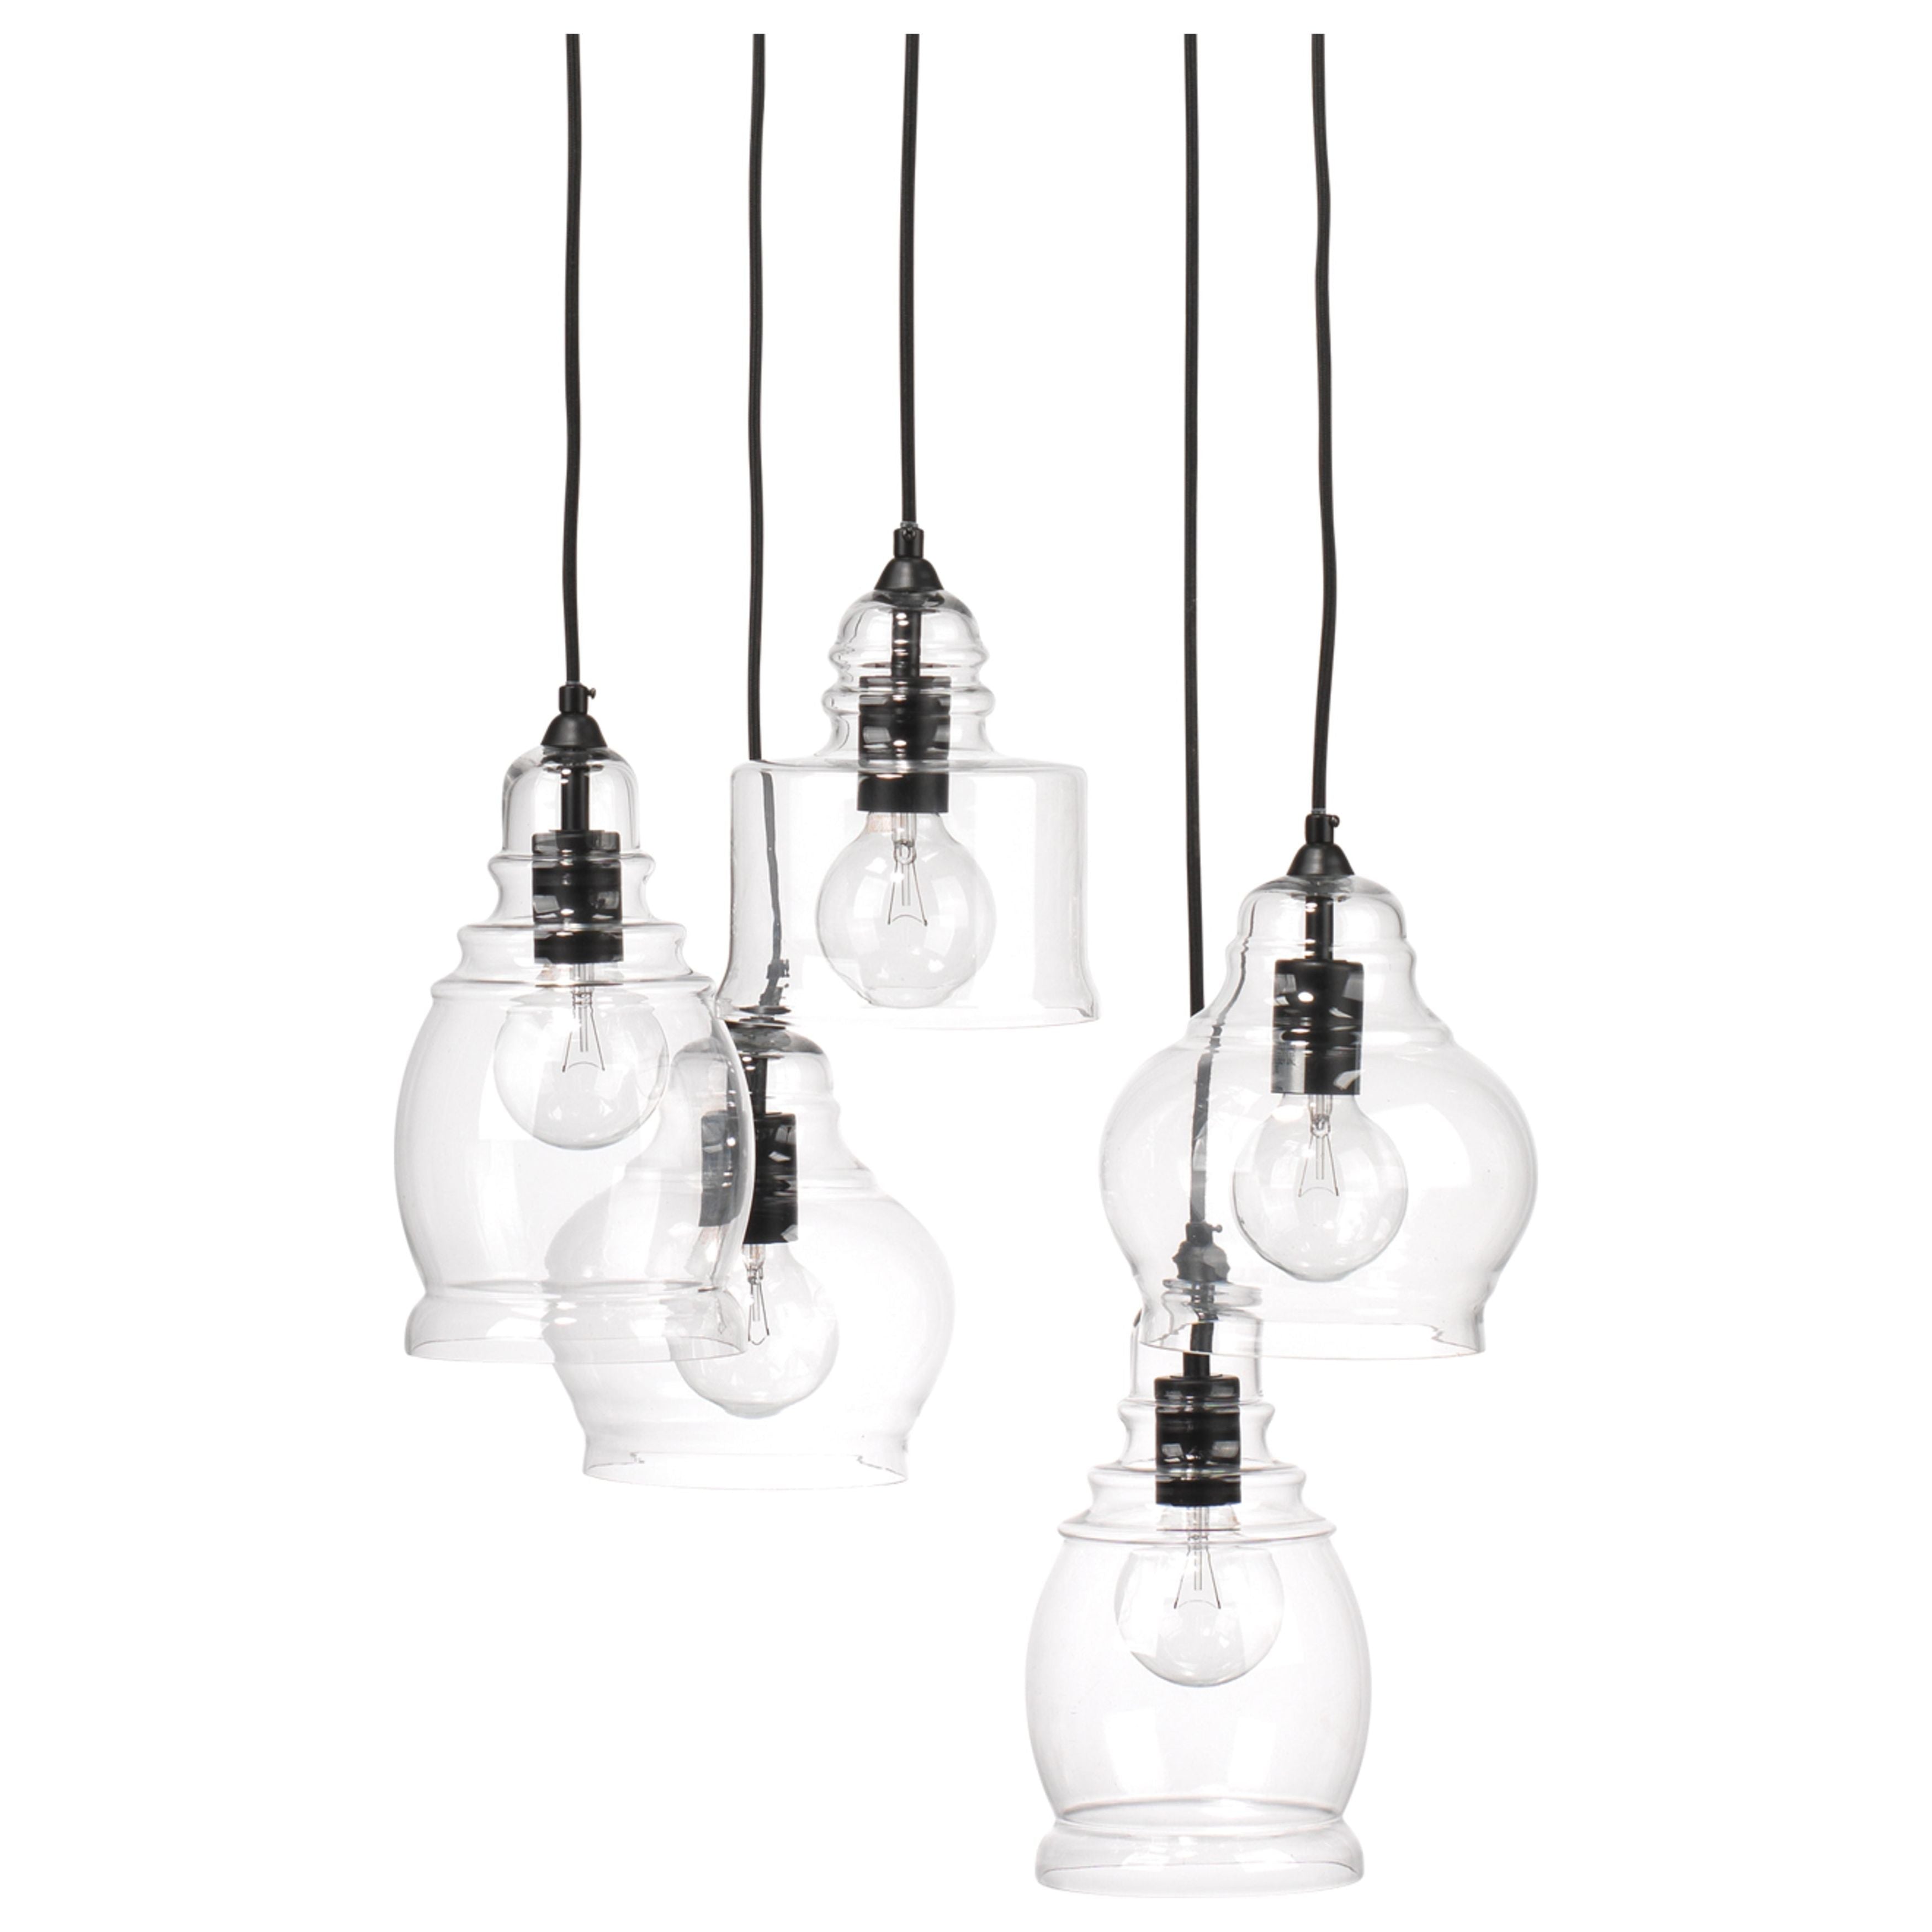 Jamie Young Company - BL516-P1 - 5 Light Pendant - 5 - Clear